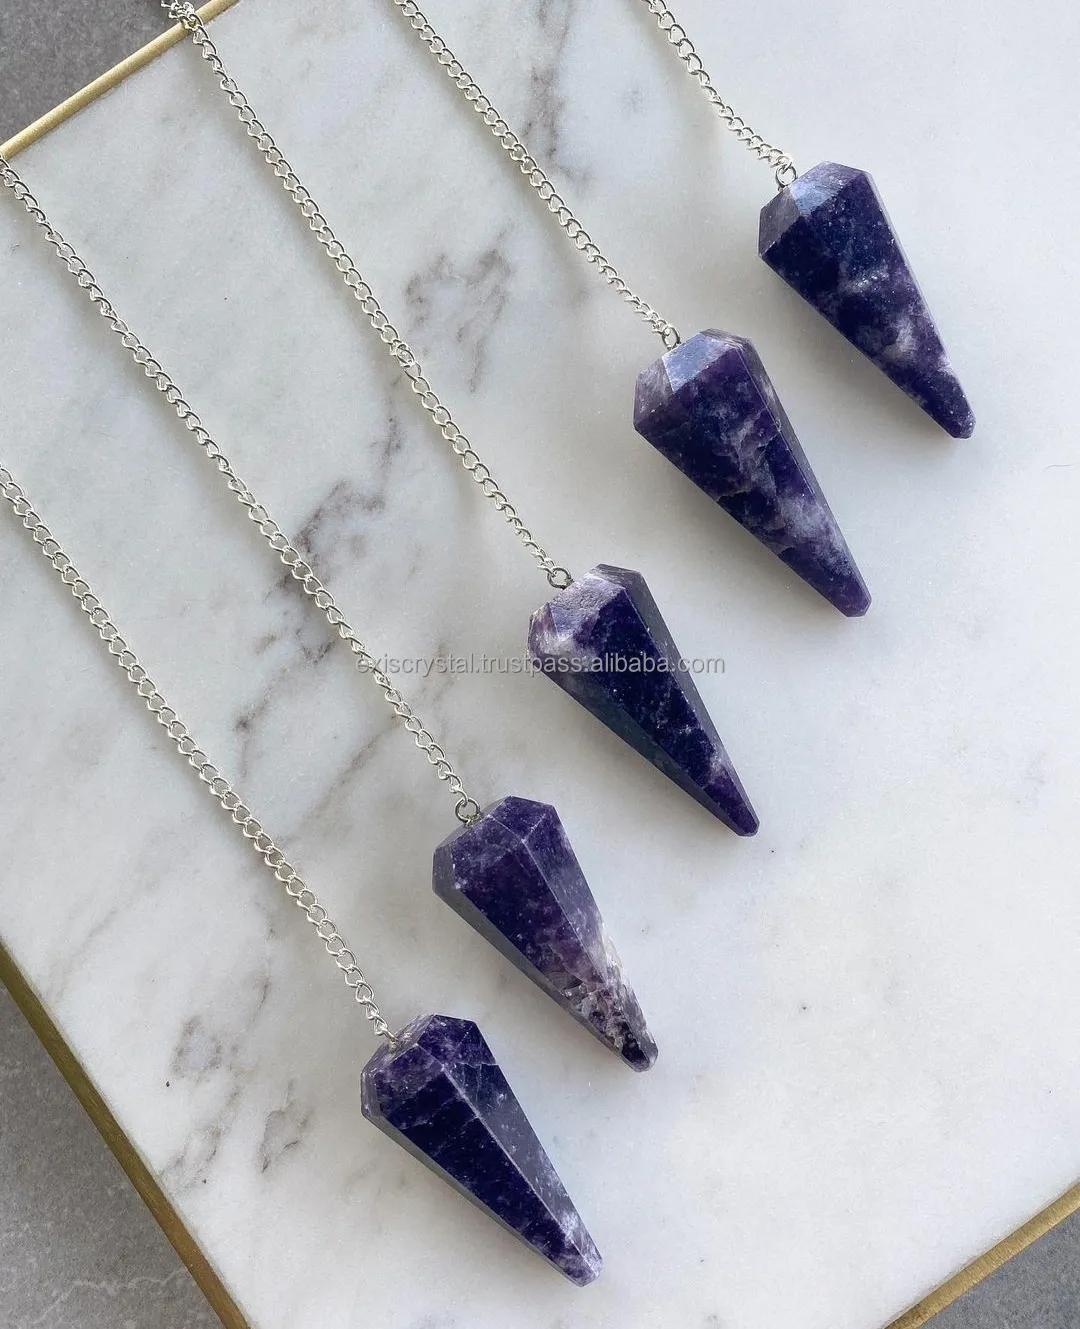 Natural Lepidolite Pendulum crystal of transition that aids in change and enhances peace and tranquility during stressful times